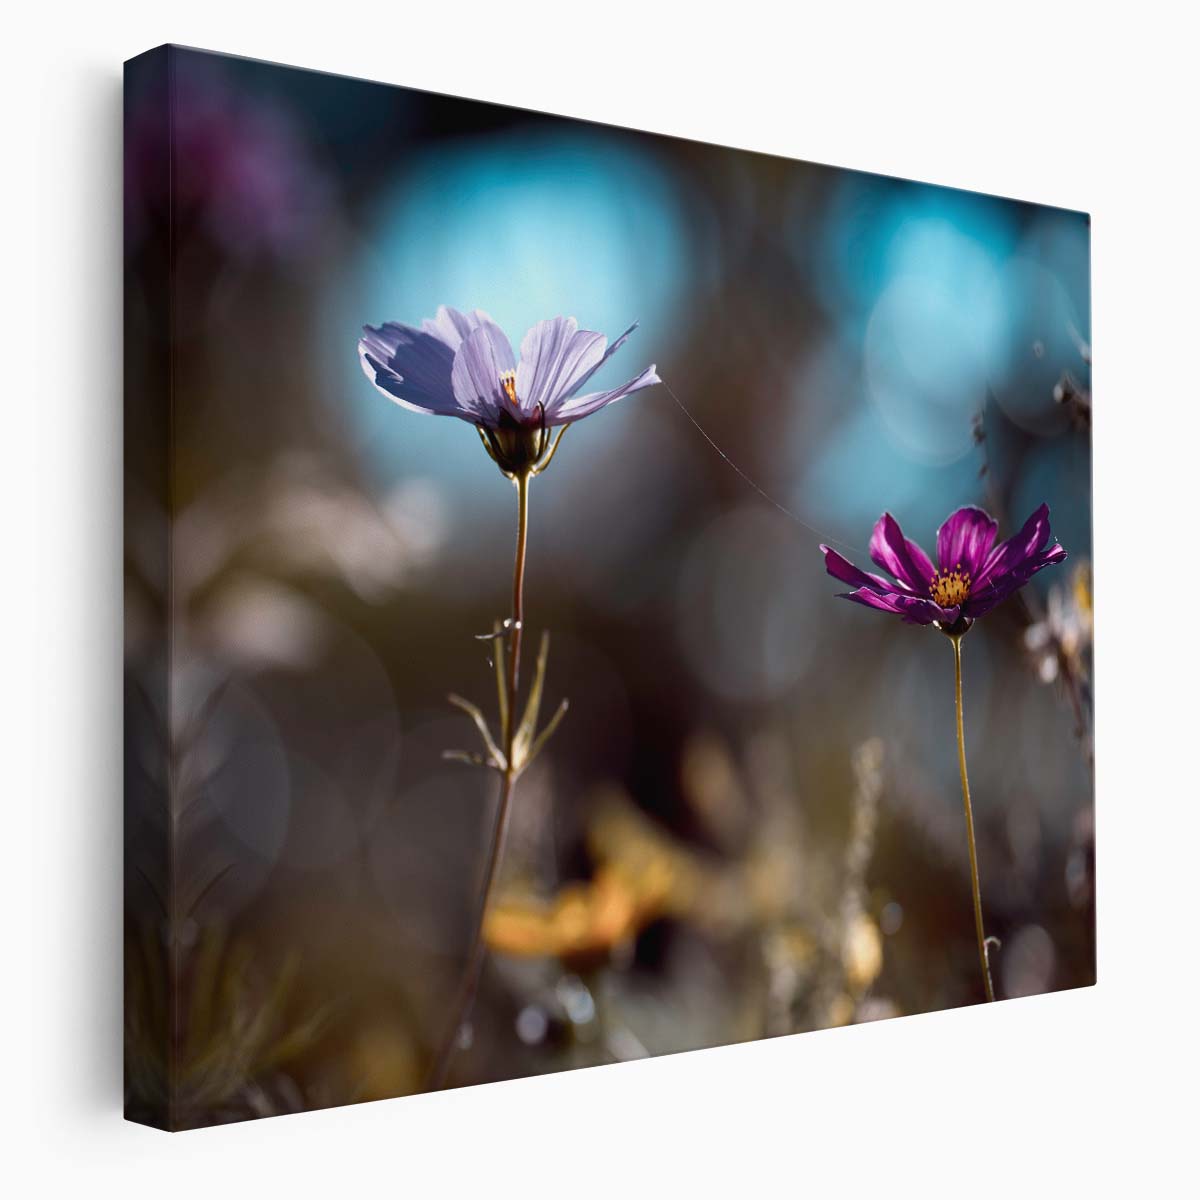 Romantic Purple Cosmos Duo Macro Floral Wall Art by Luxuriance Designs. Made in USA.